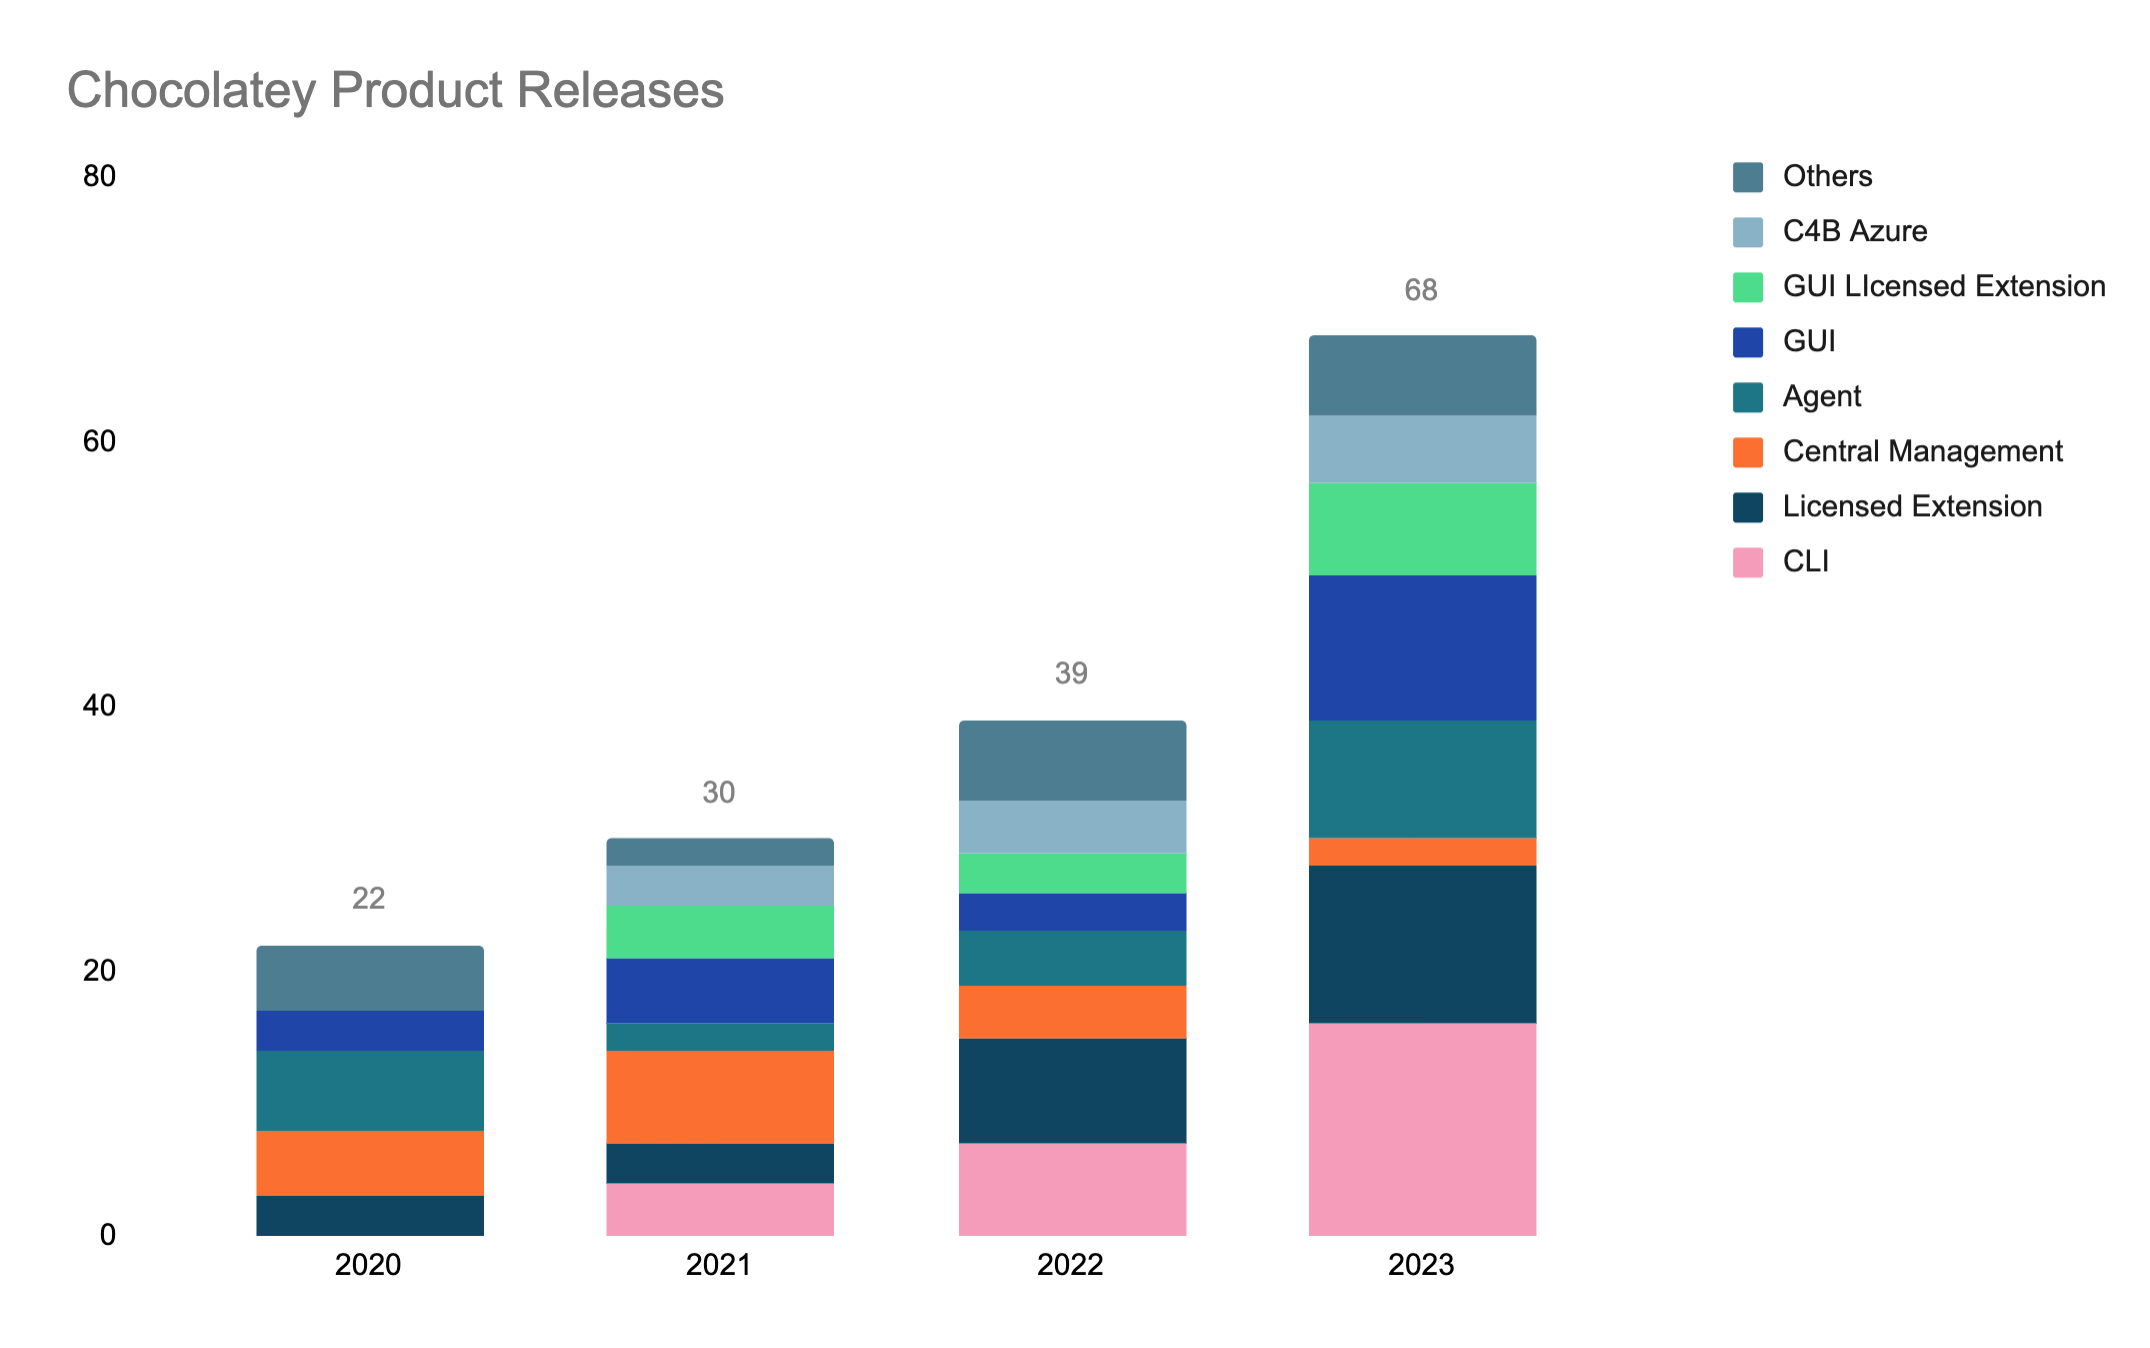 Chocolatey Product Releases from 2020 to 2023